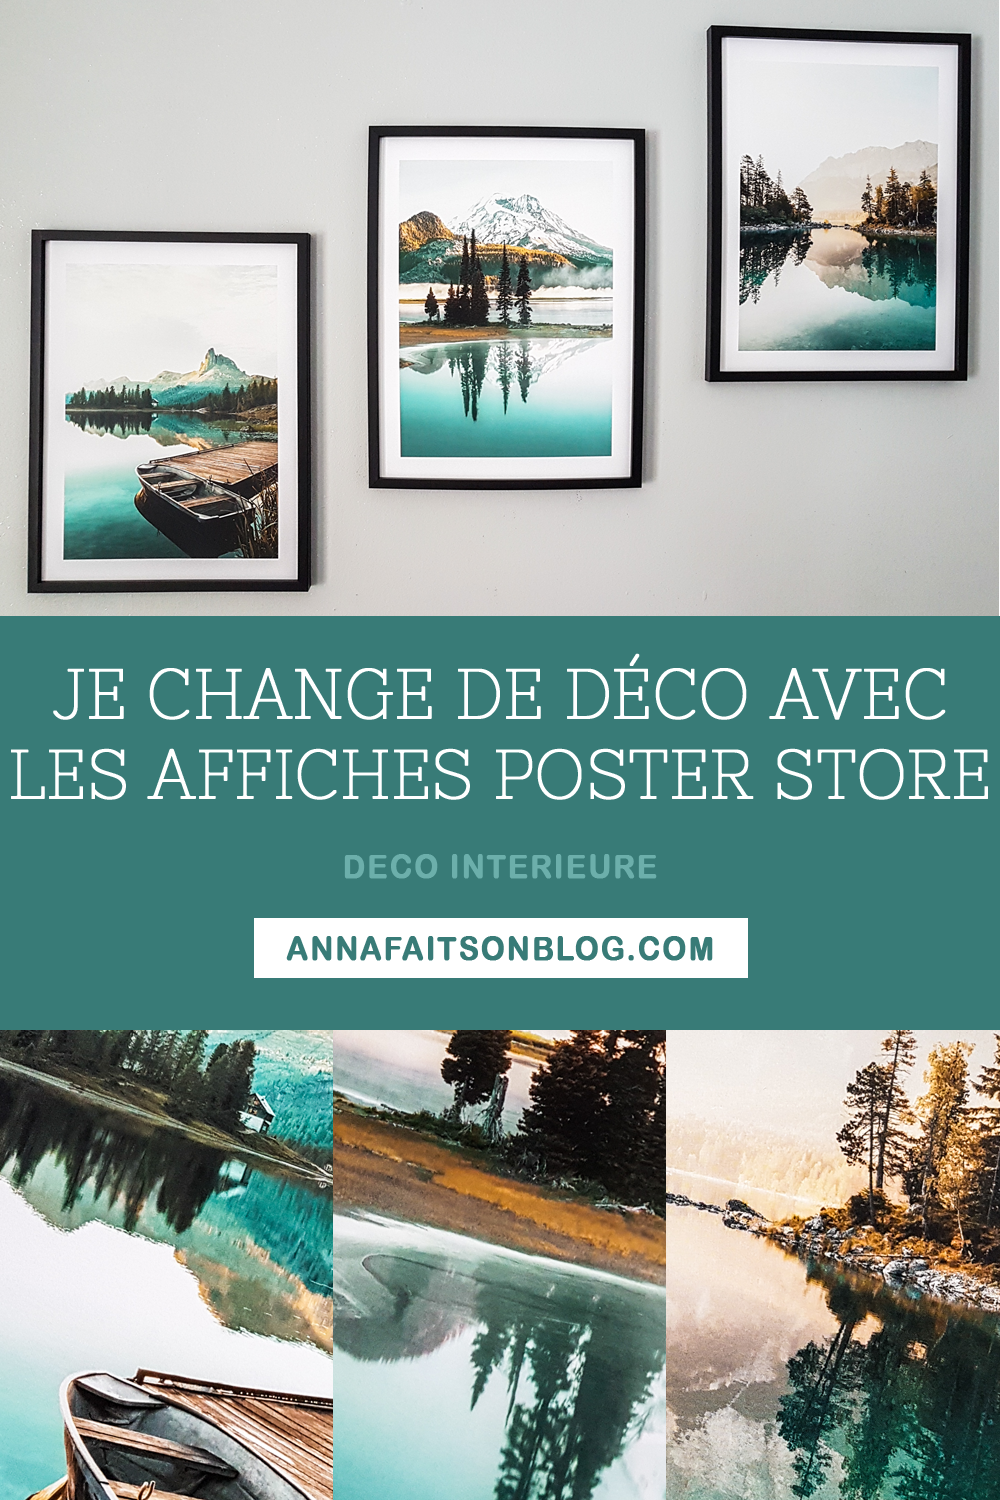 Affiches Poster Store #decoration #posters